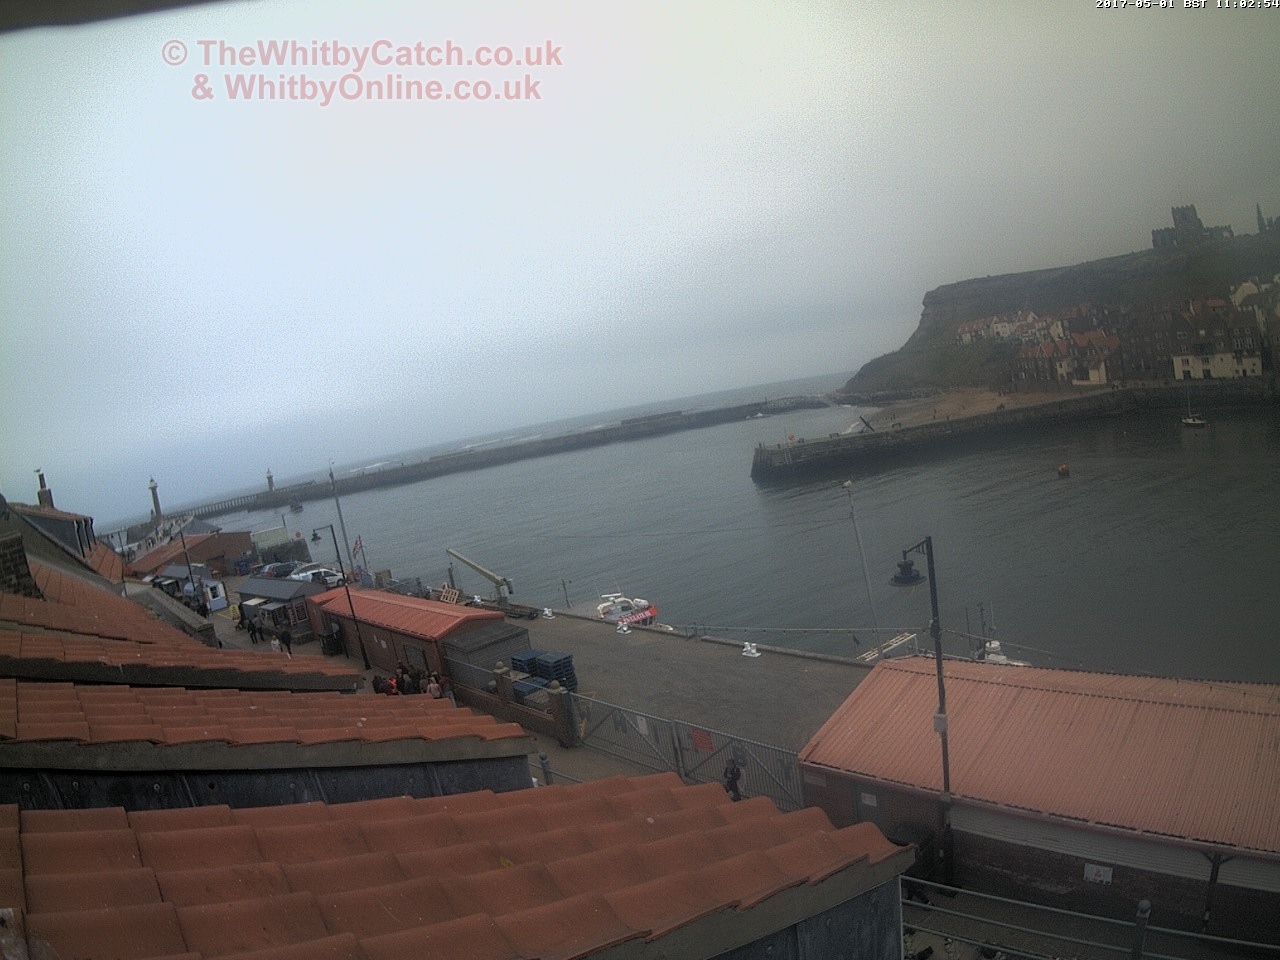 Whitby Mon 1st May 2017 11:03.